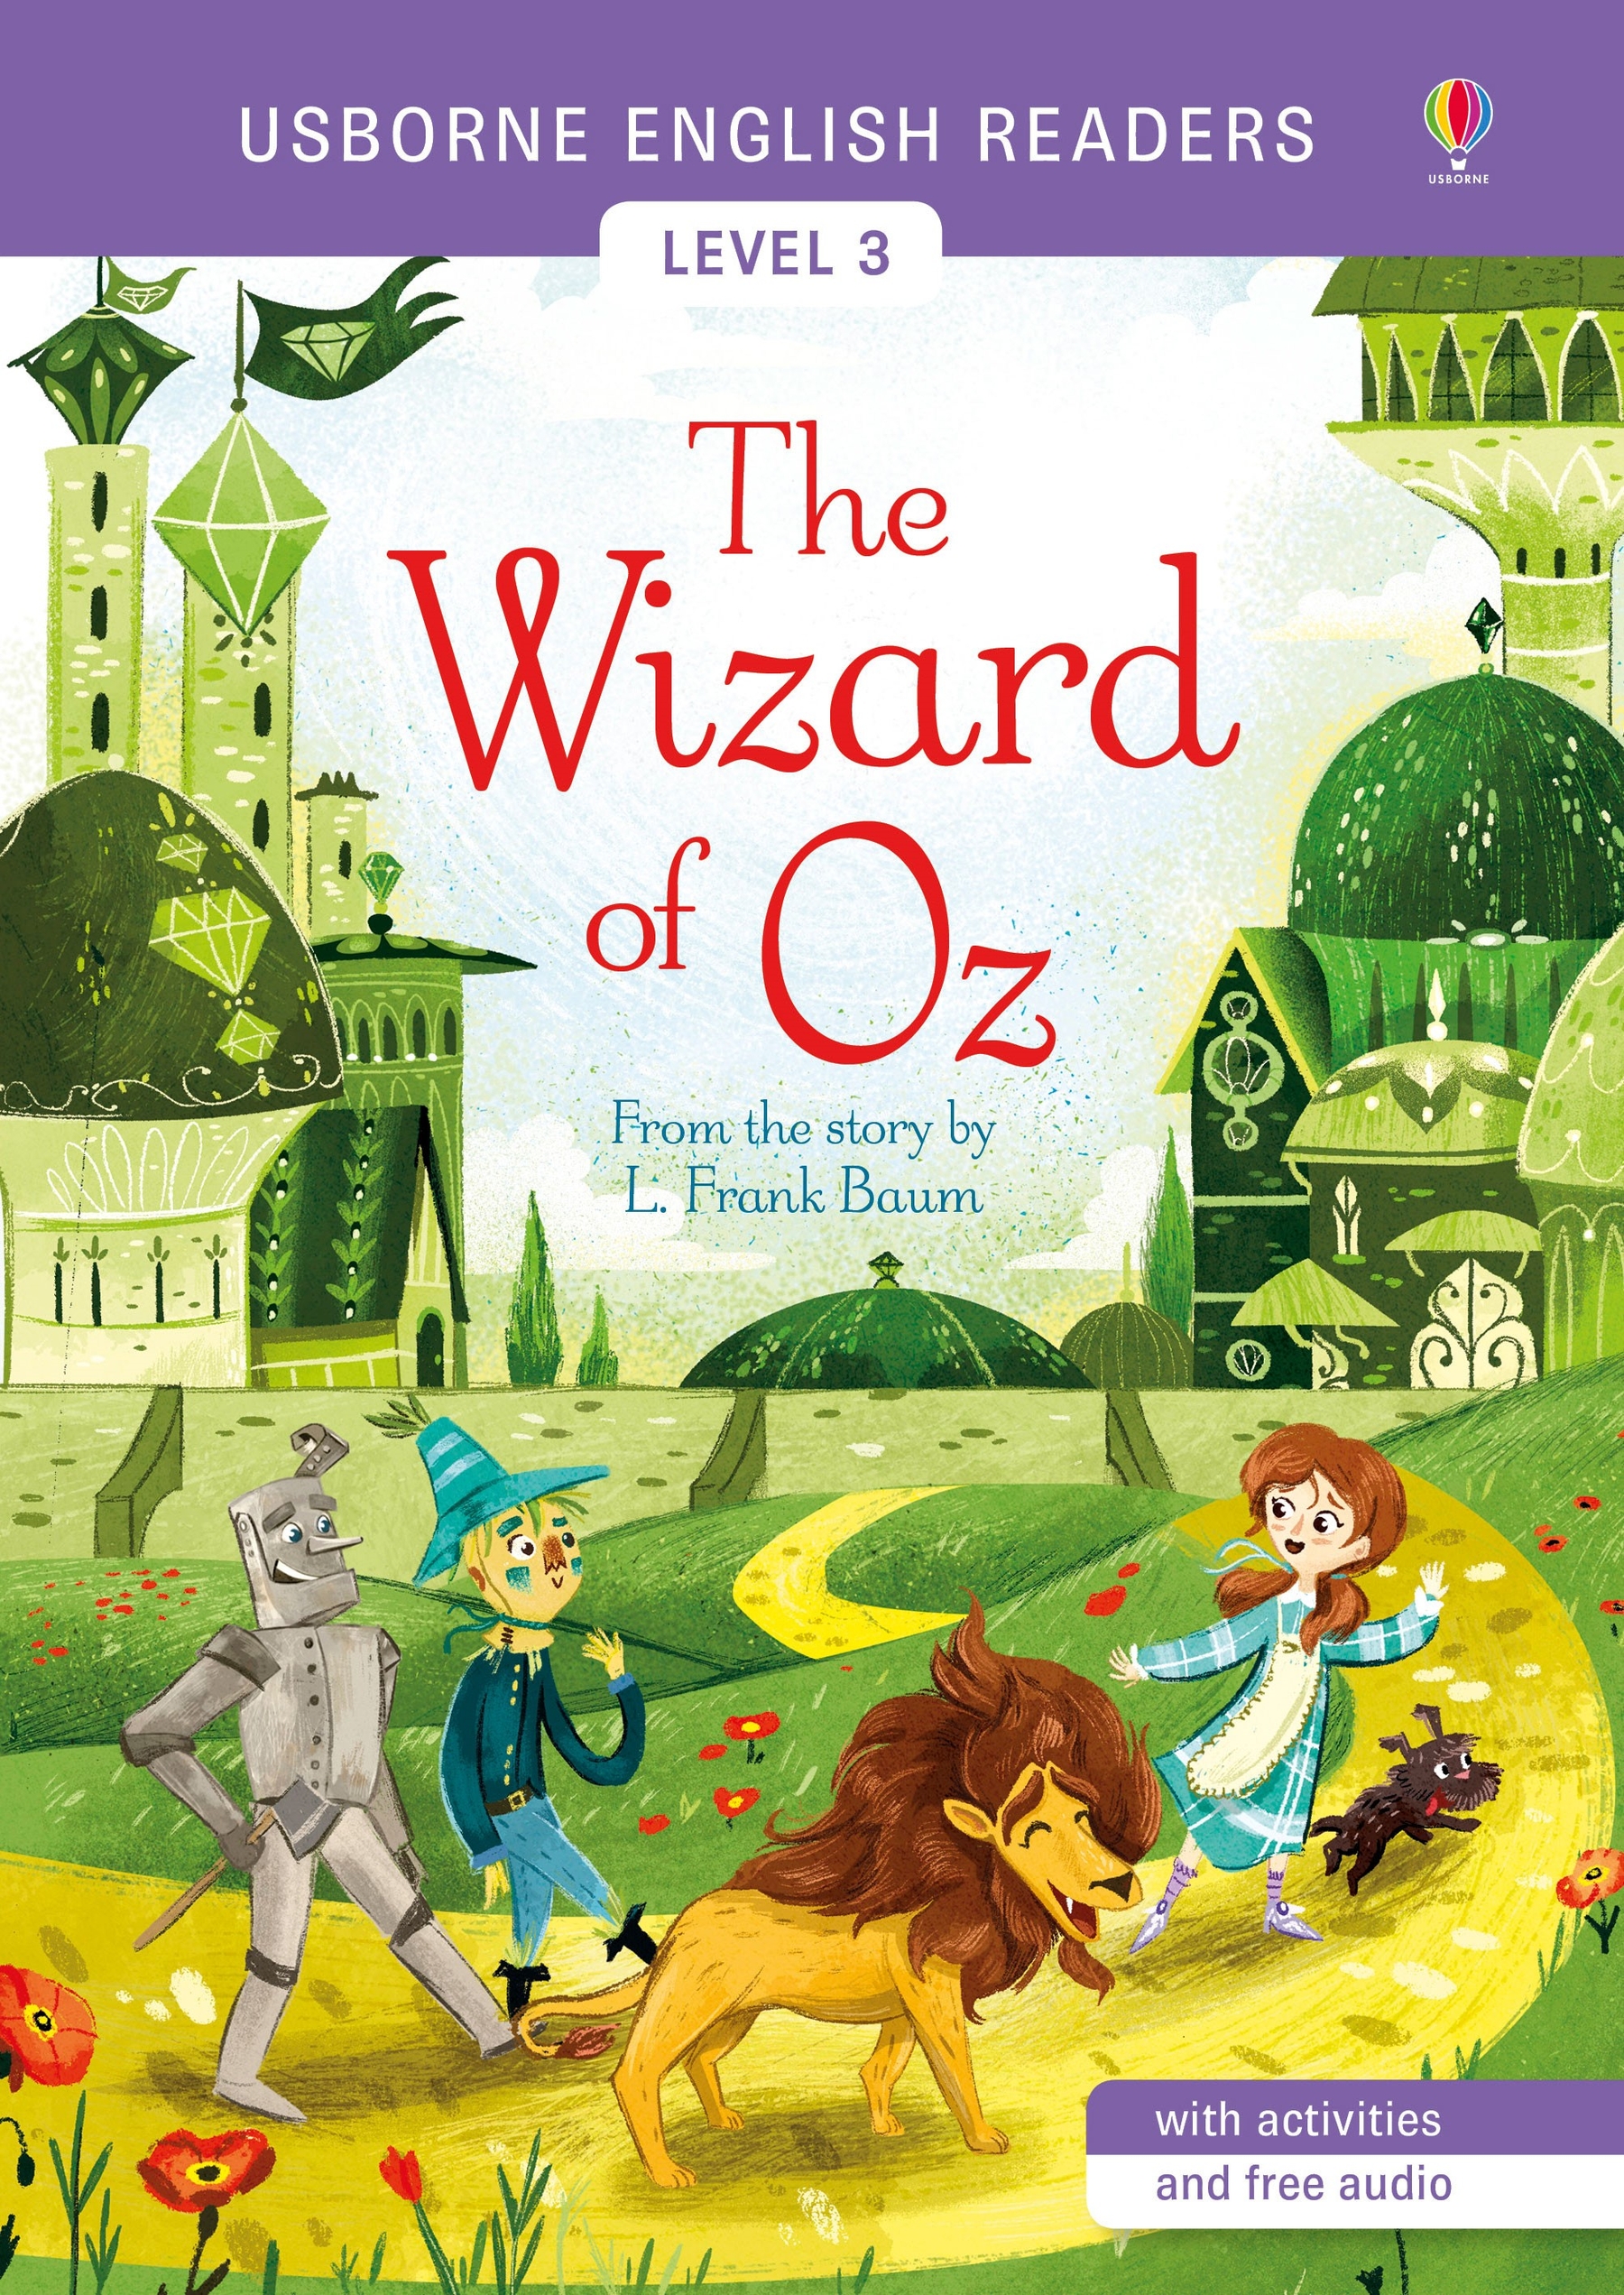 Be　The　of　Usborne　Wizard　Oz　Curious